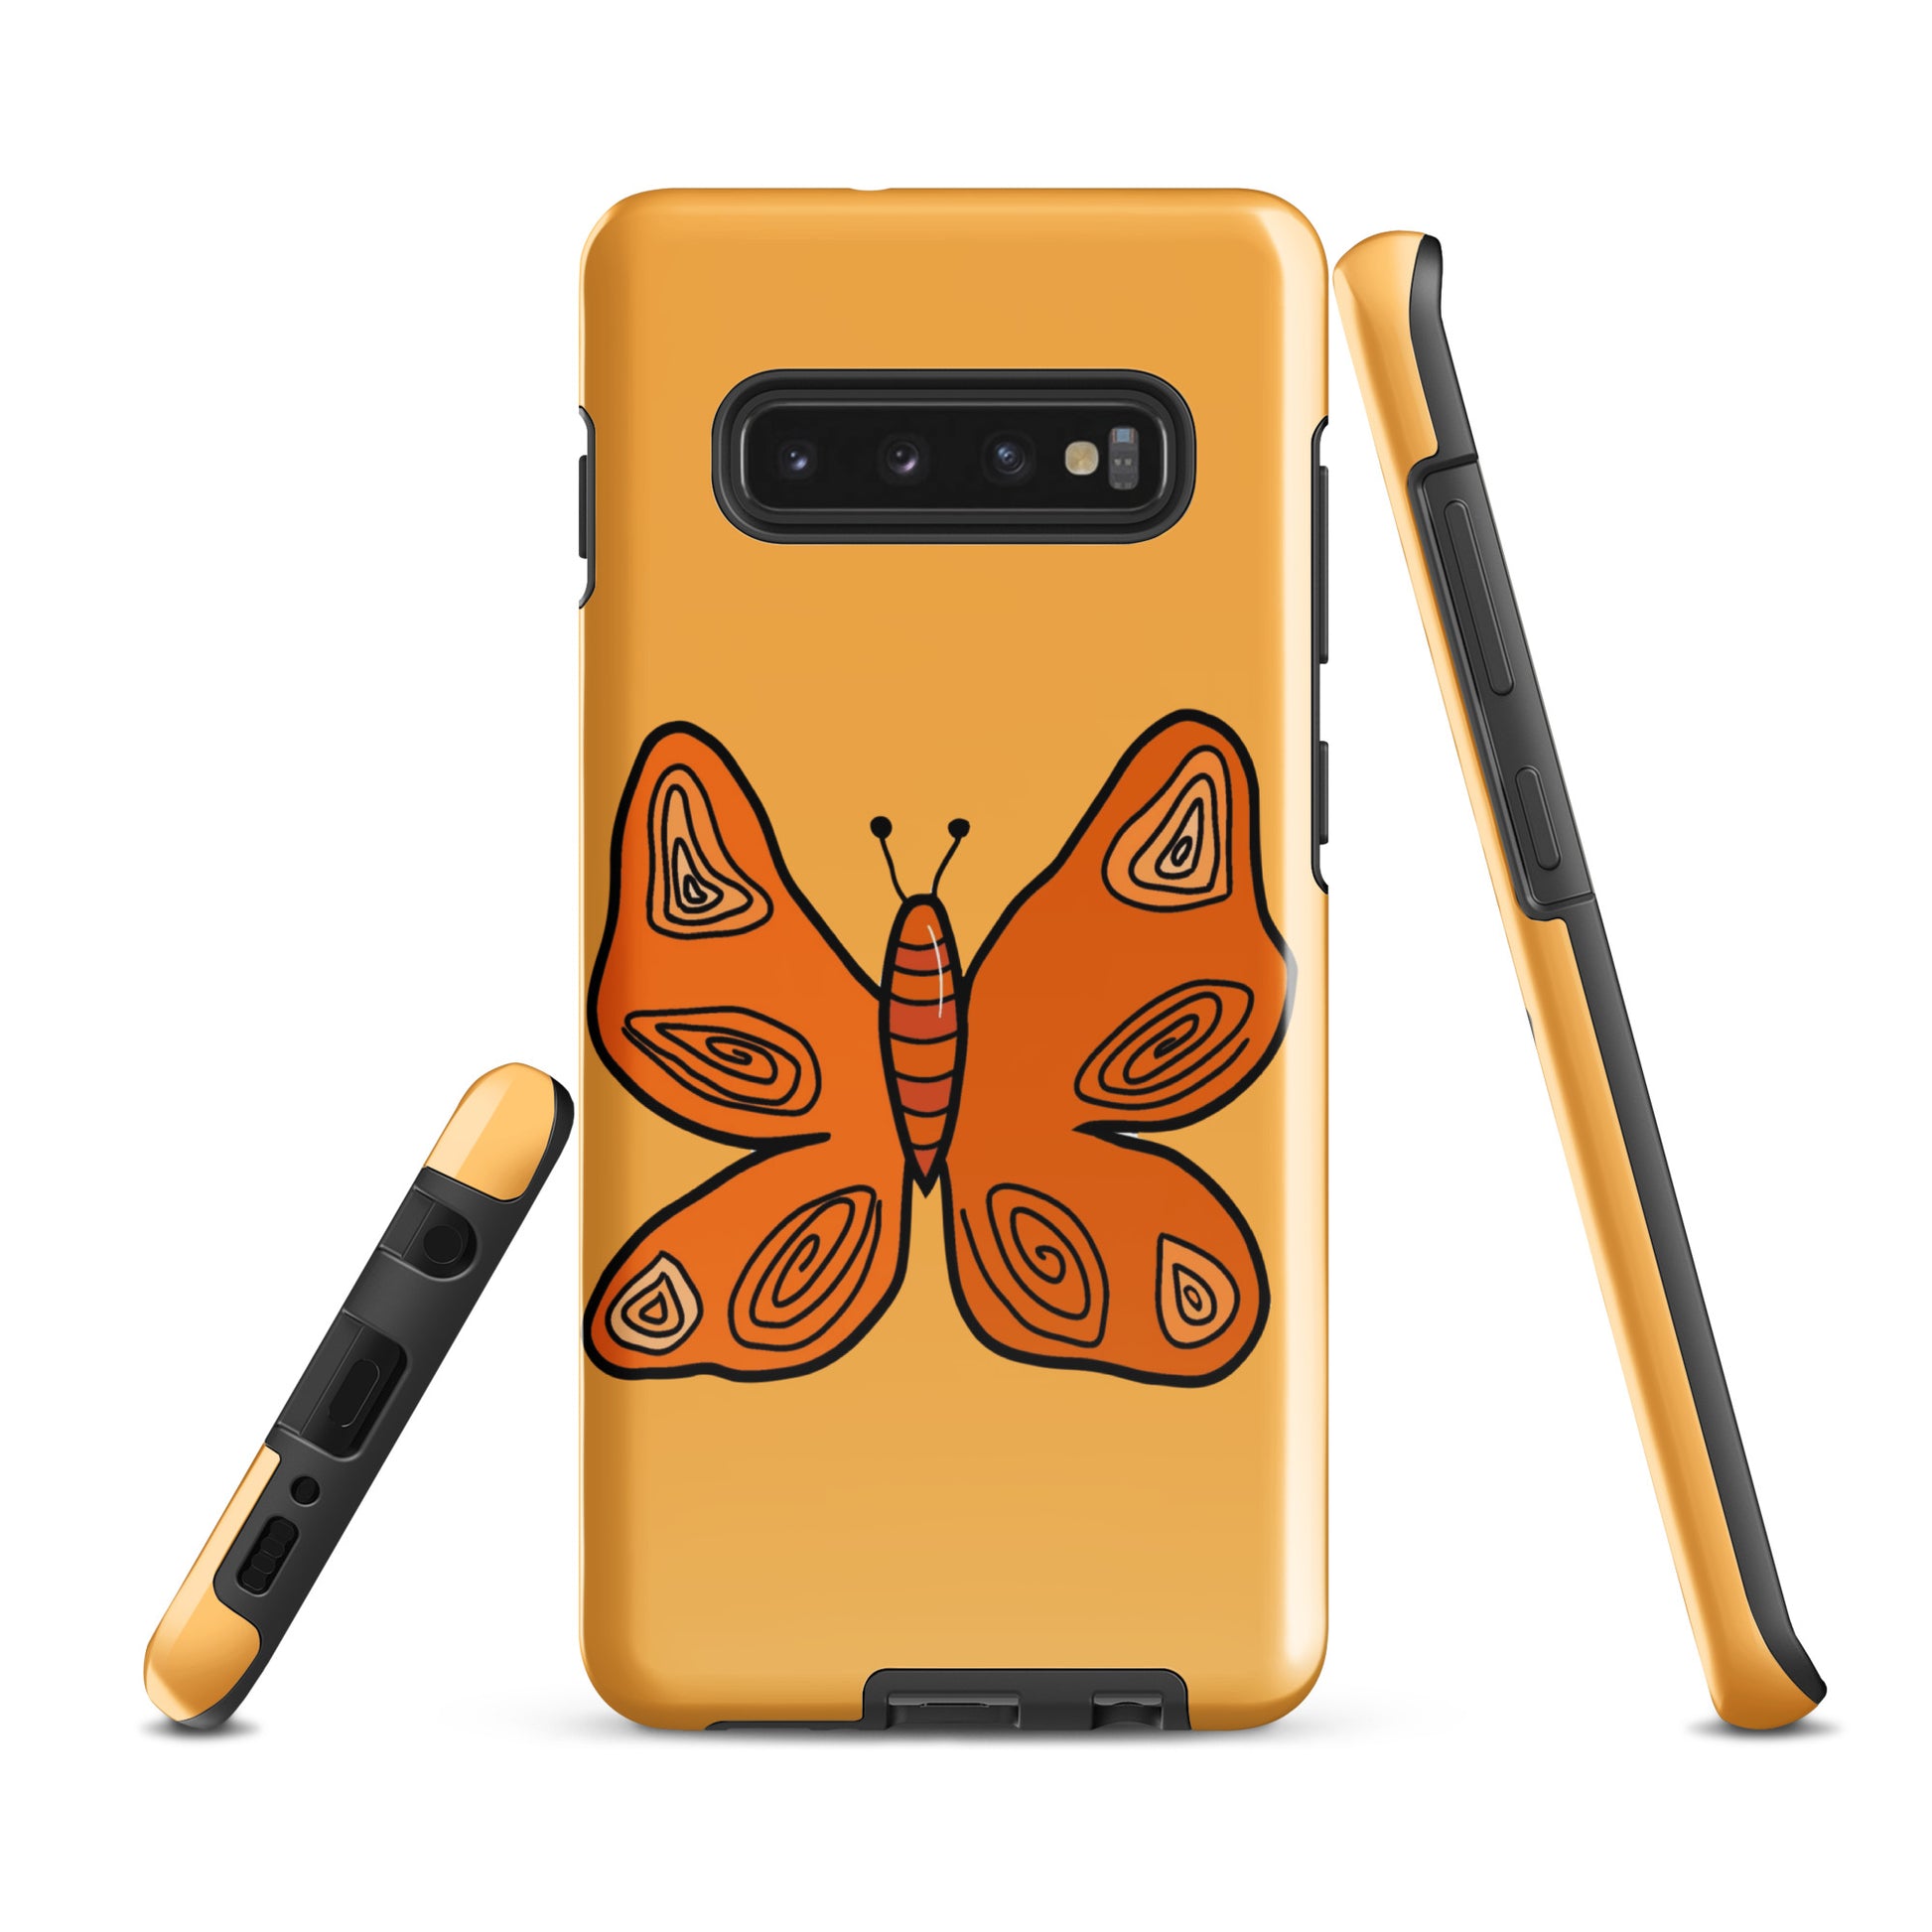 An Orange Butterfly Case for the Samsung Galaxy S10 Plus